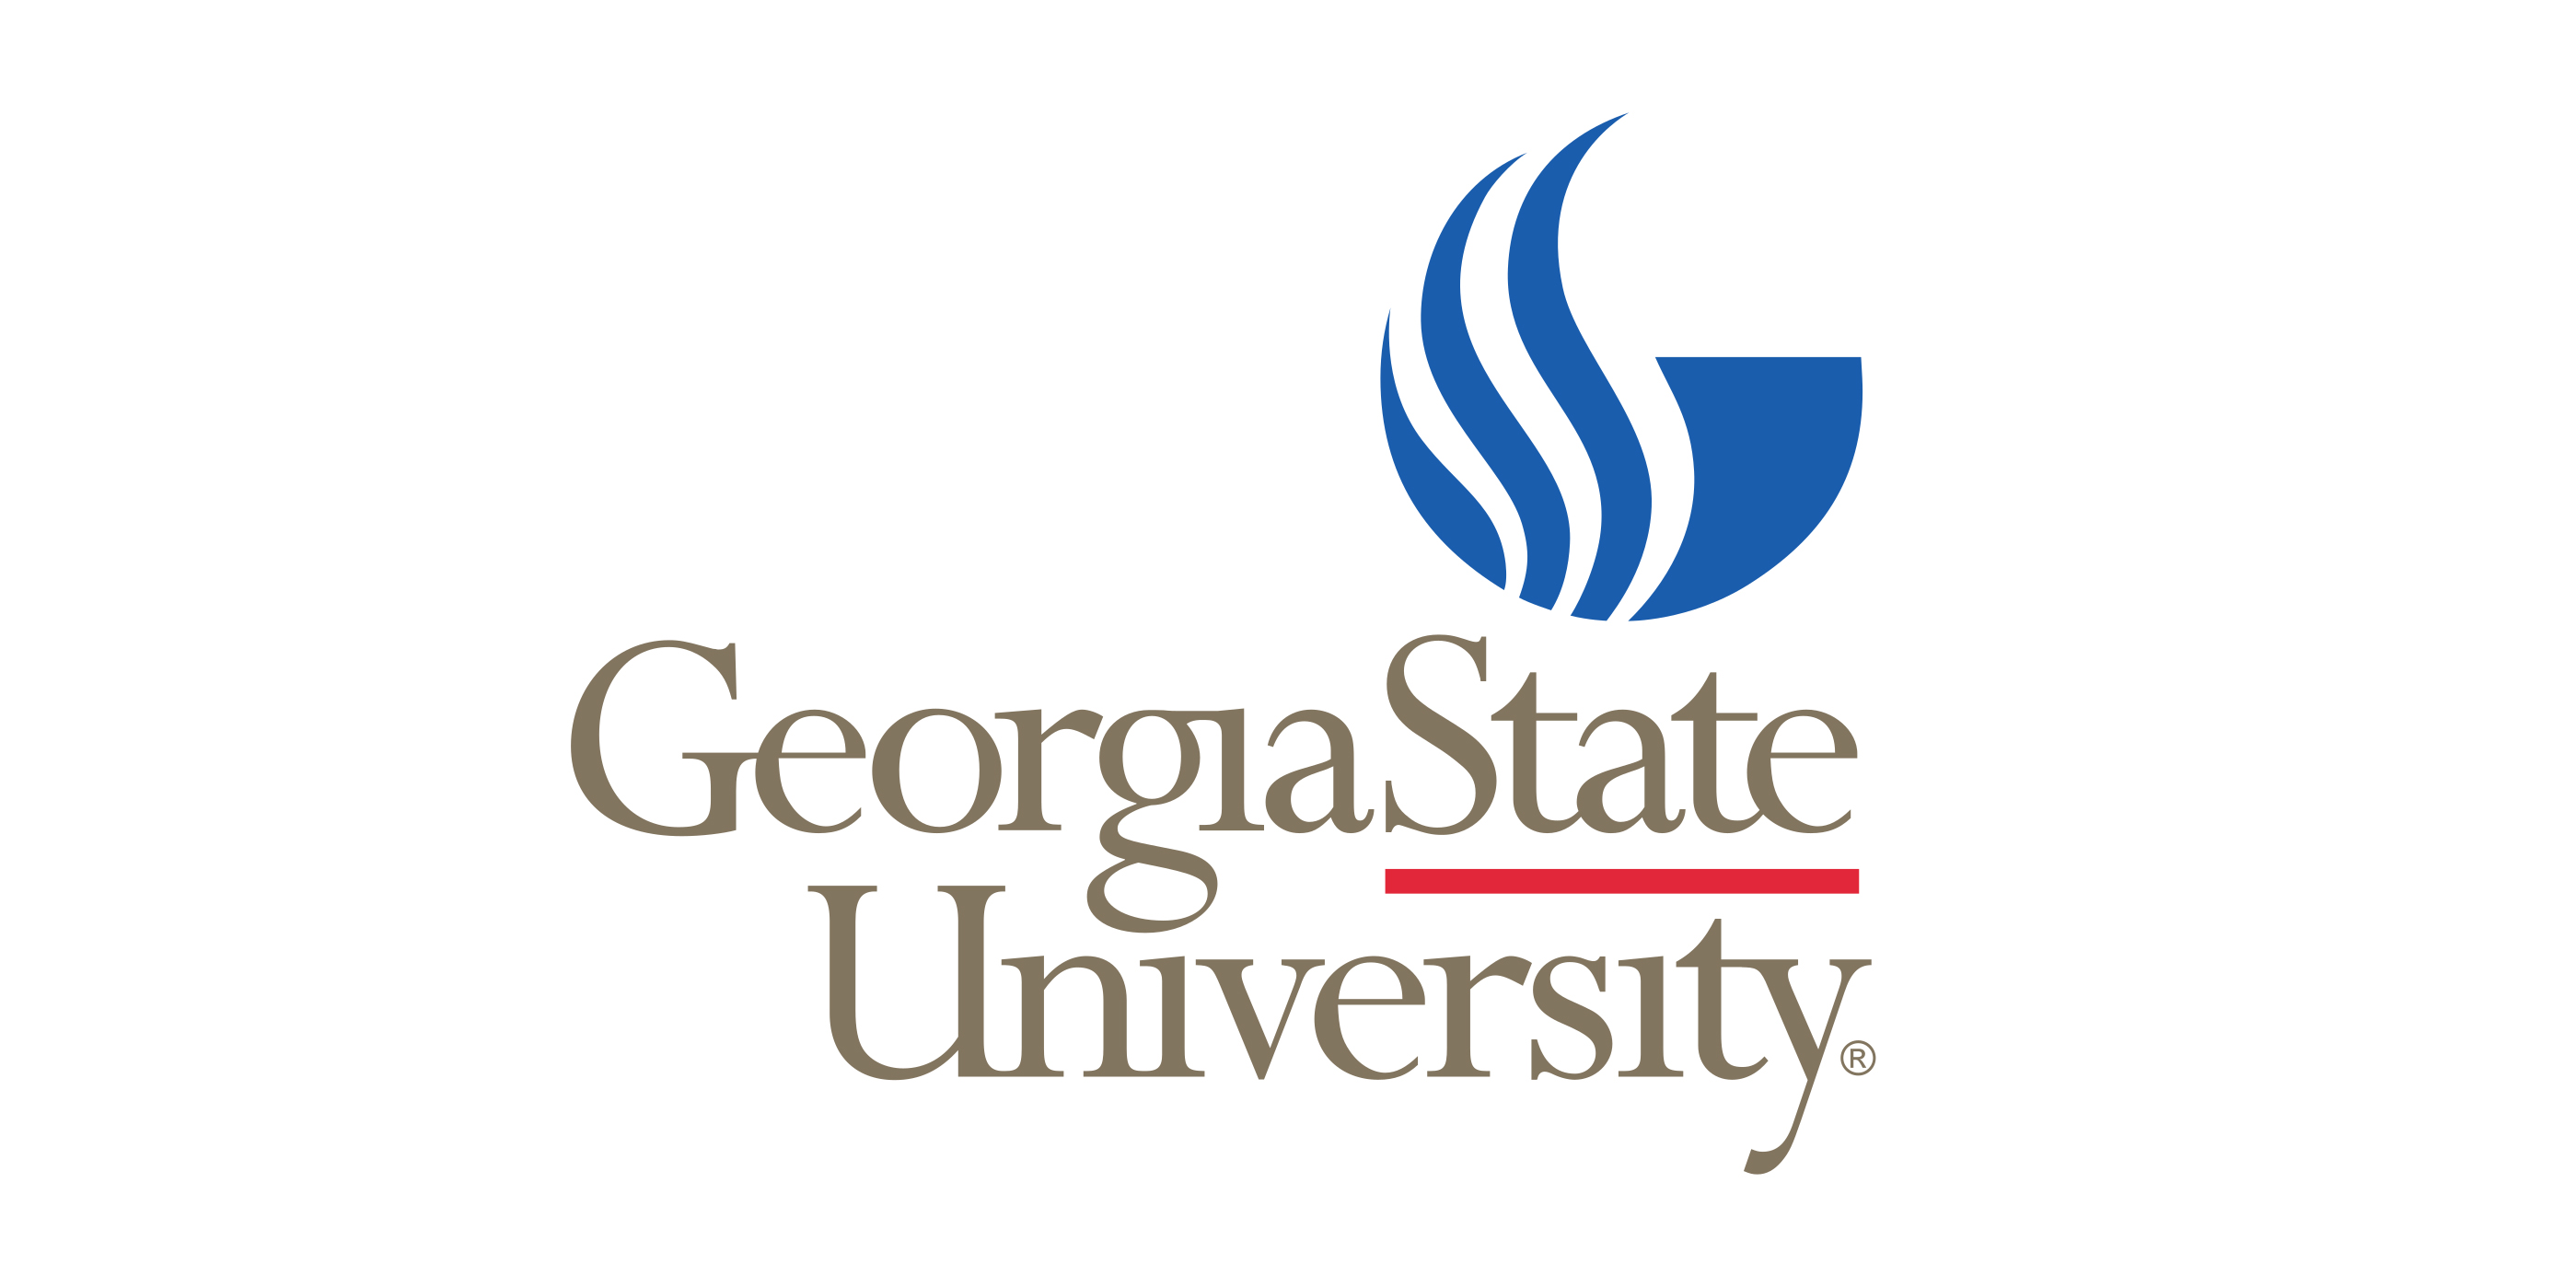 Georgia State University and AD Astra Will Collaborate on a Data Integration Framework Designed to Facilitate Student Success